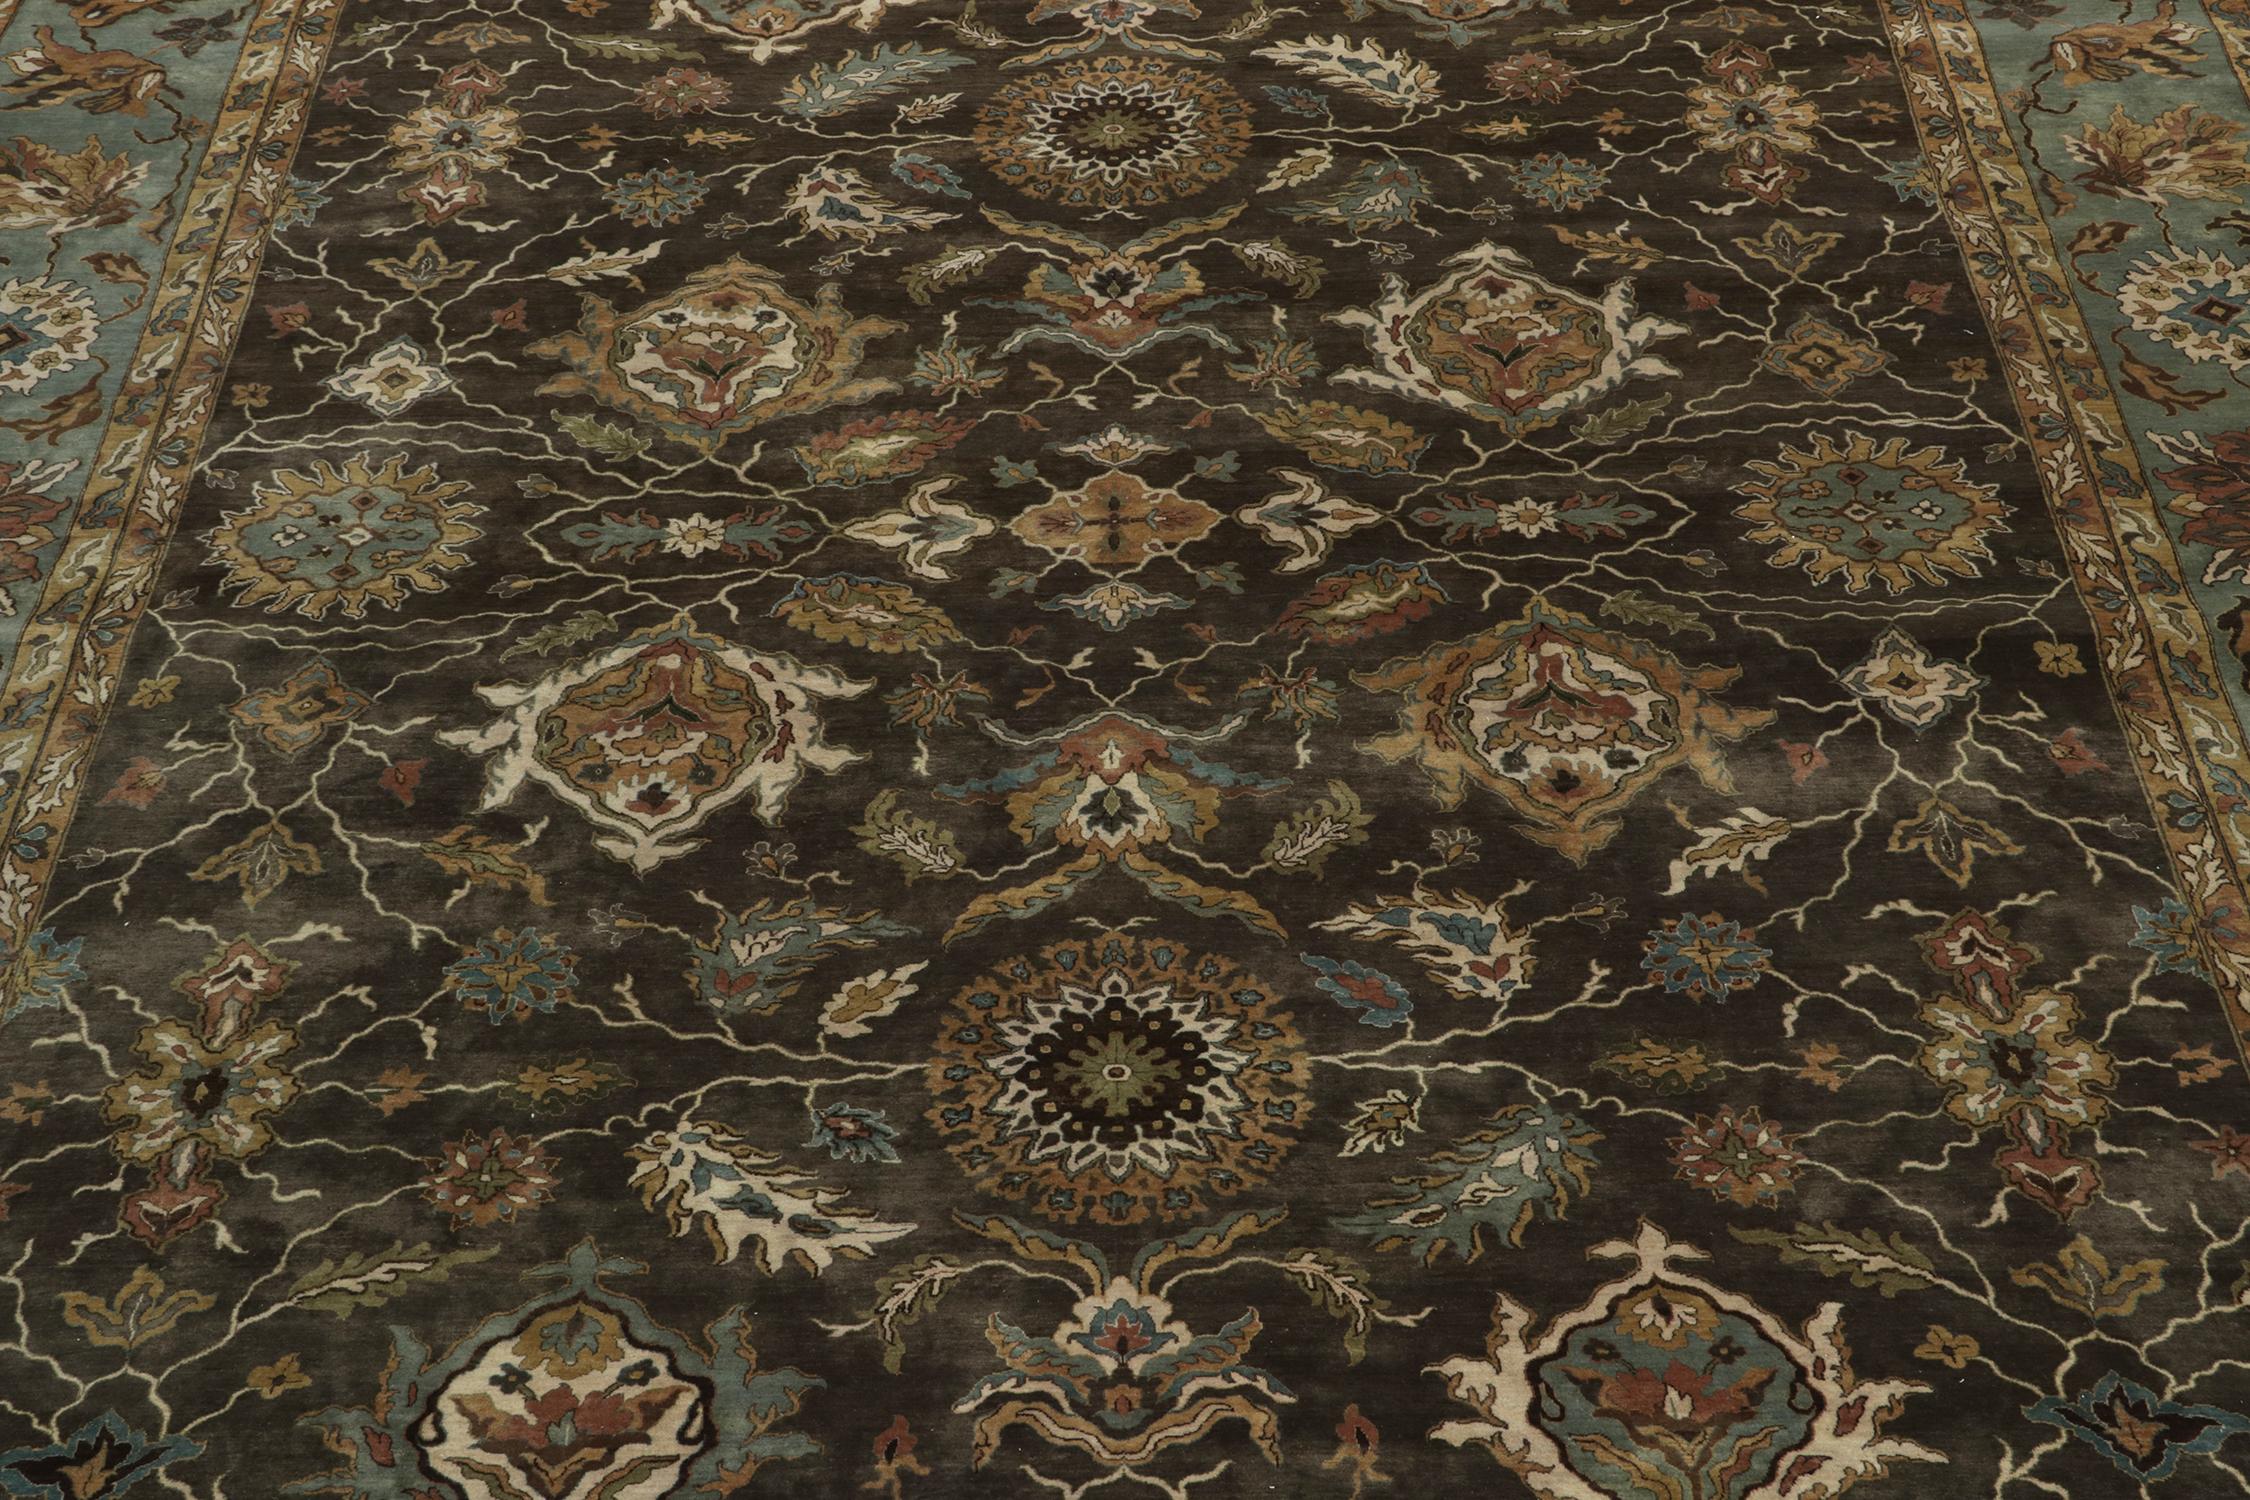 Rug & Kilim’s Classic Tabriz style rug in Brown, Blue and Gold Floral Patterns In New Condition For Sale In Long Island City, NY